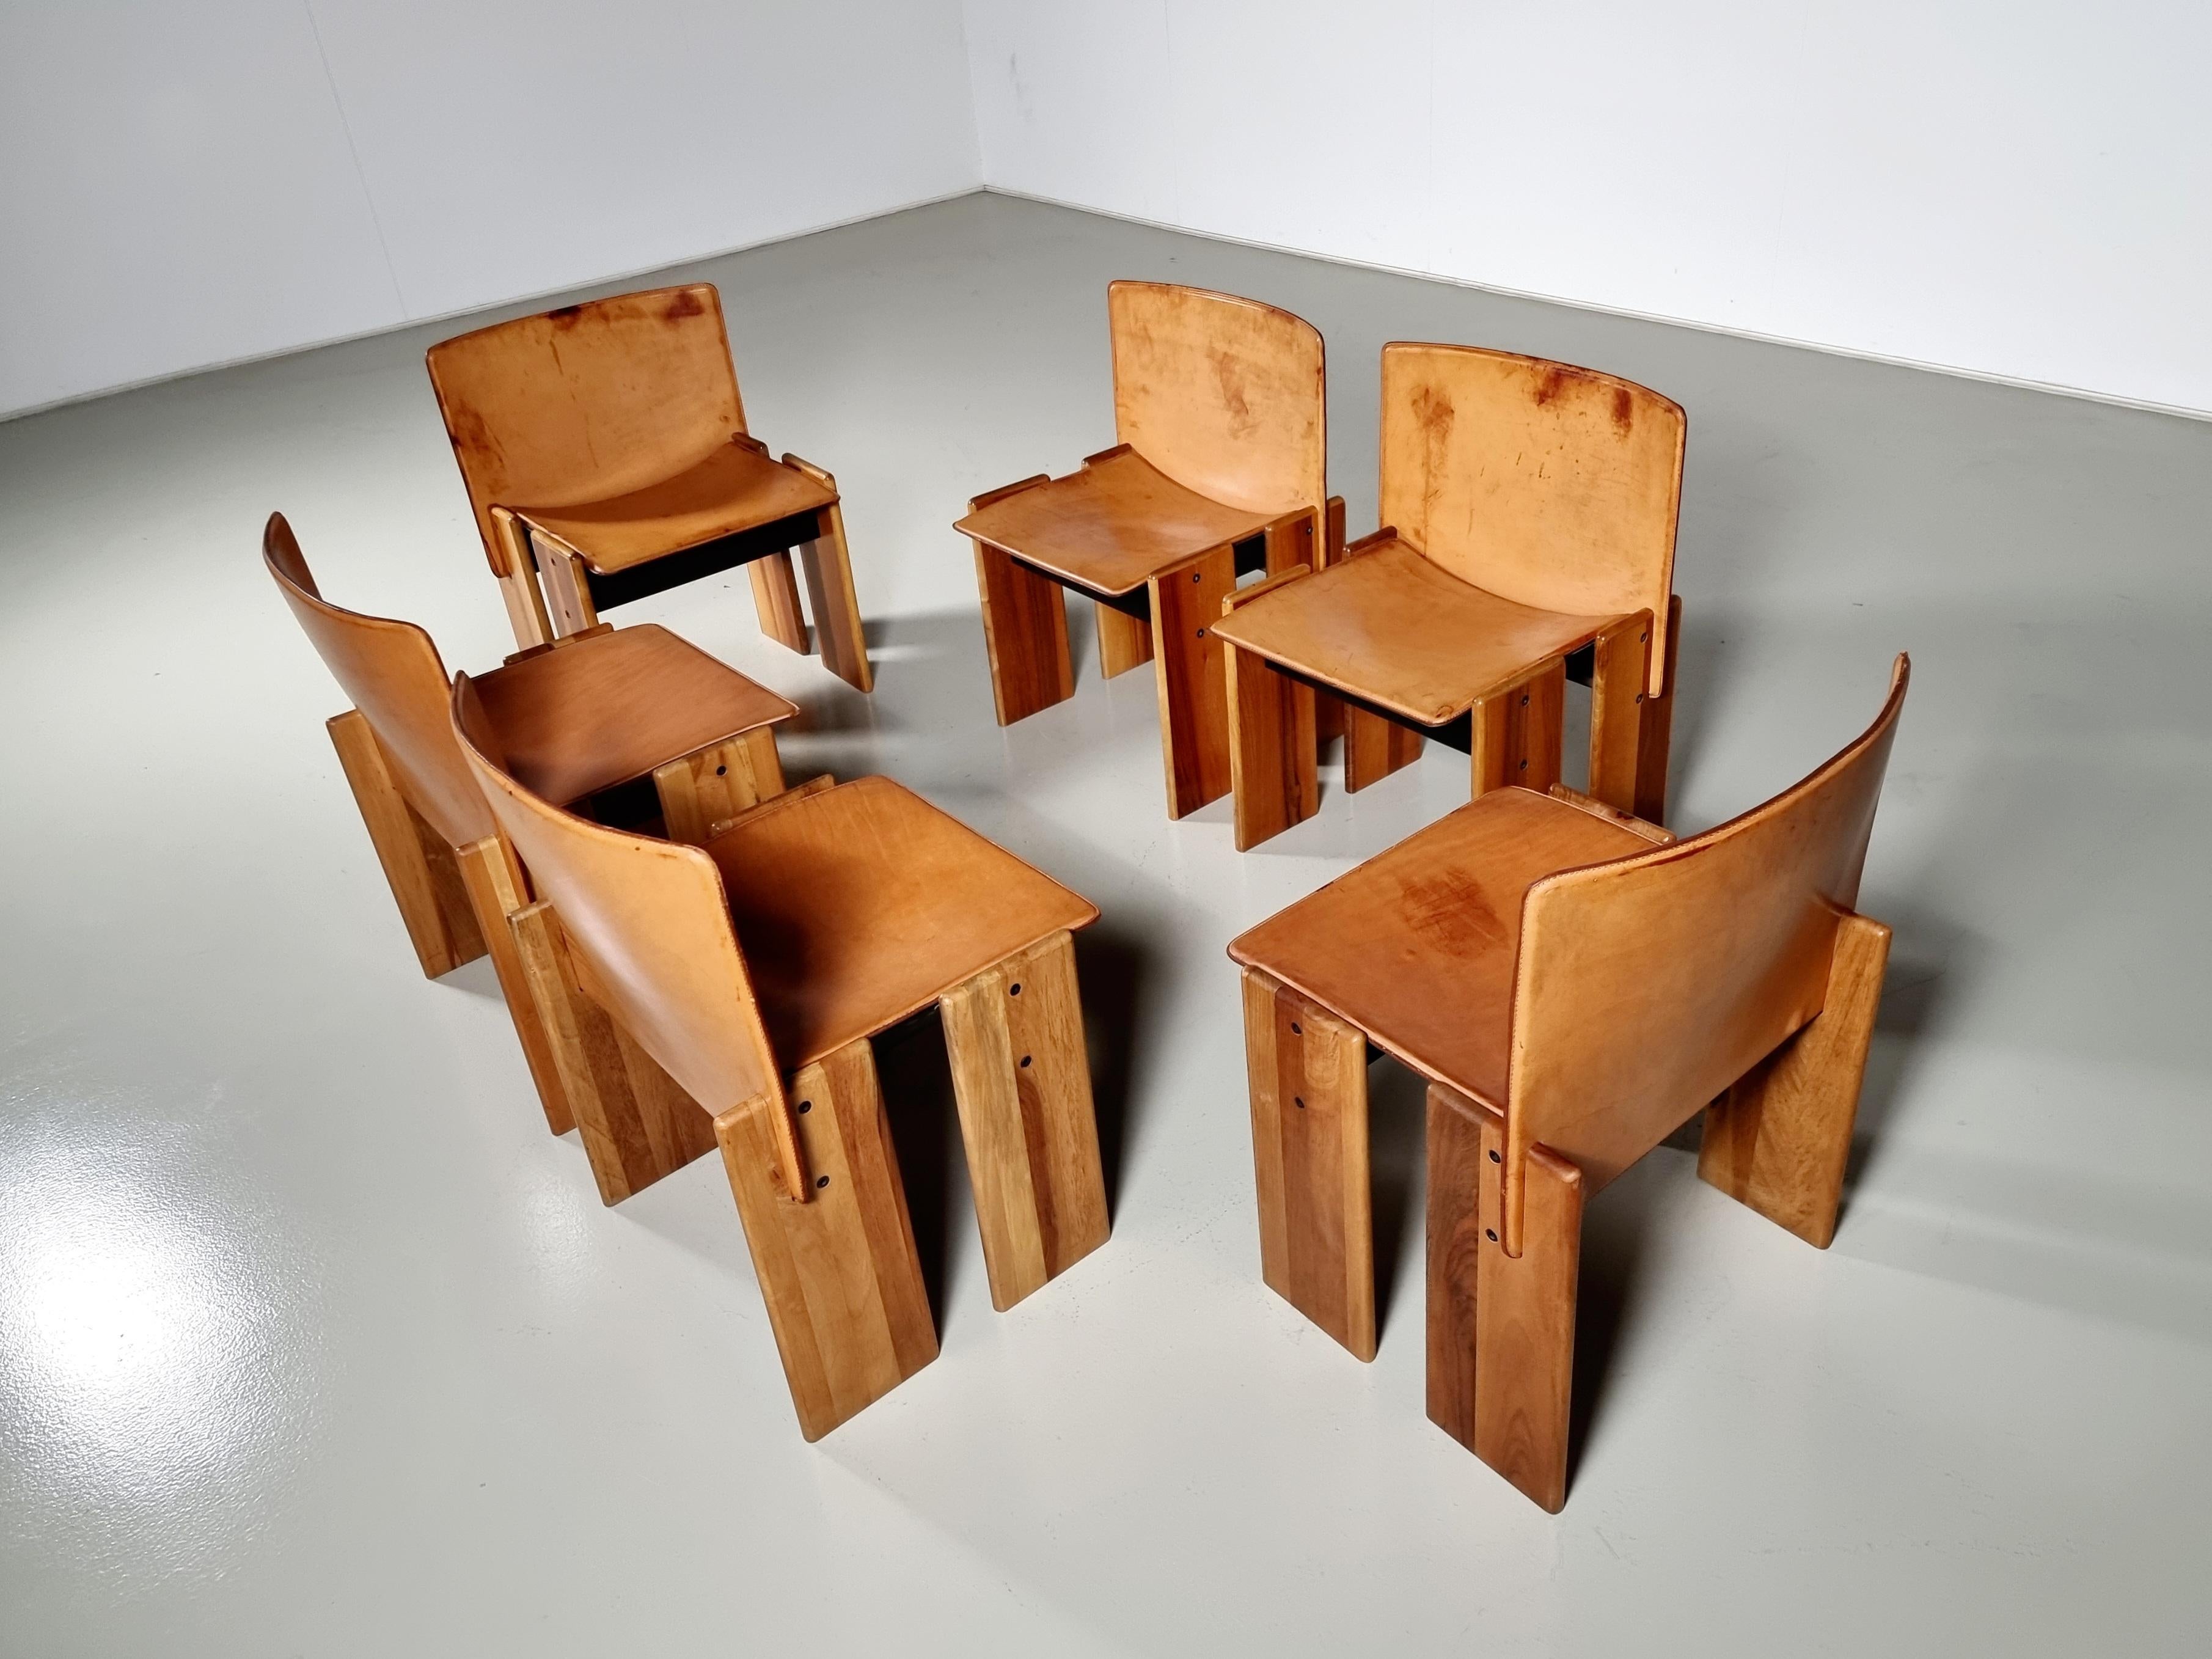 Solid Walnut and leather dining chairs, Sapporo, Mobil Girgi, 1970s

The deep cognac leather shows a beautiful patina and forms a striking combination with the walnut wood. Interesting is the 'flat' shape of this chair where the designer has chosen